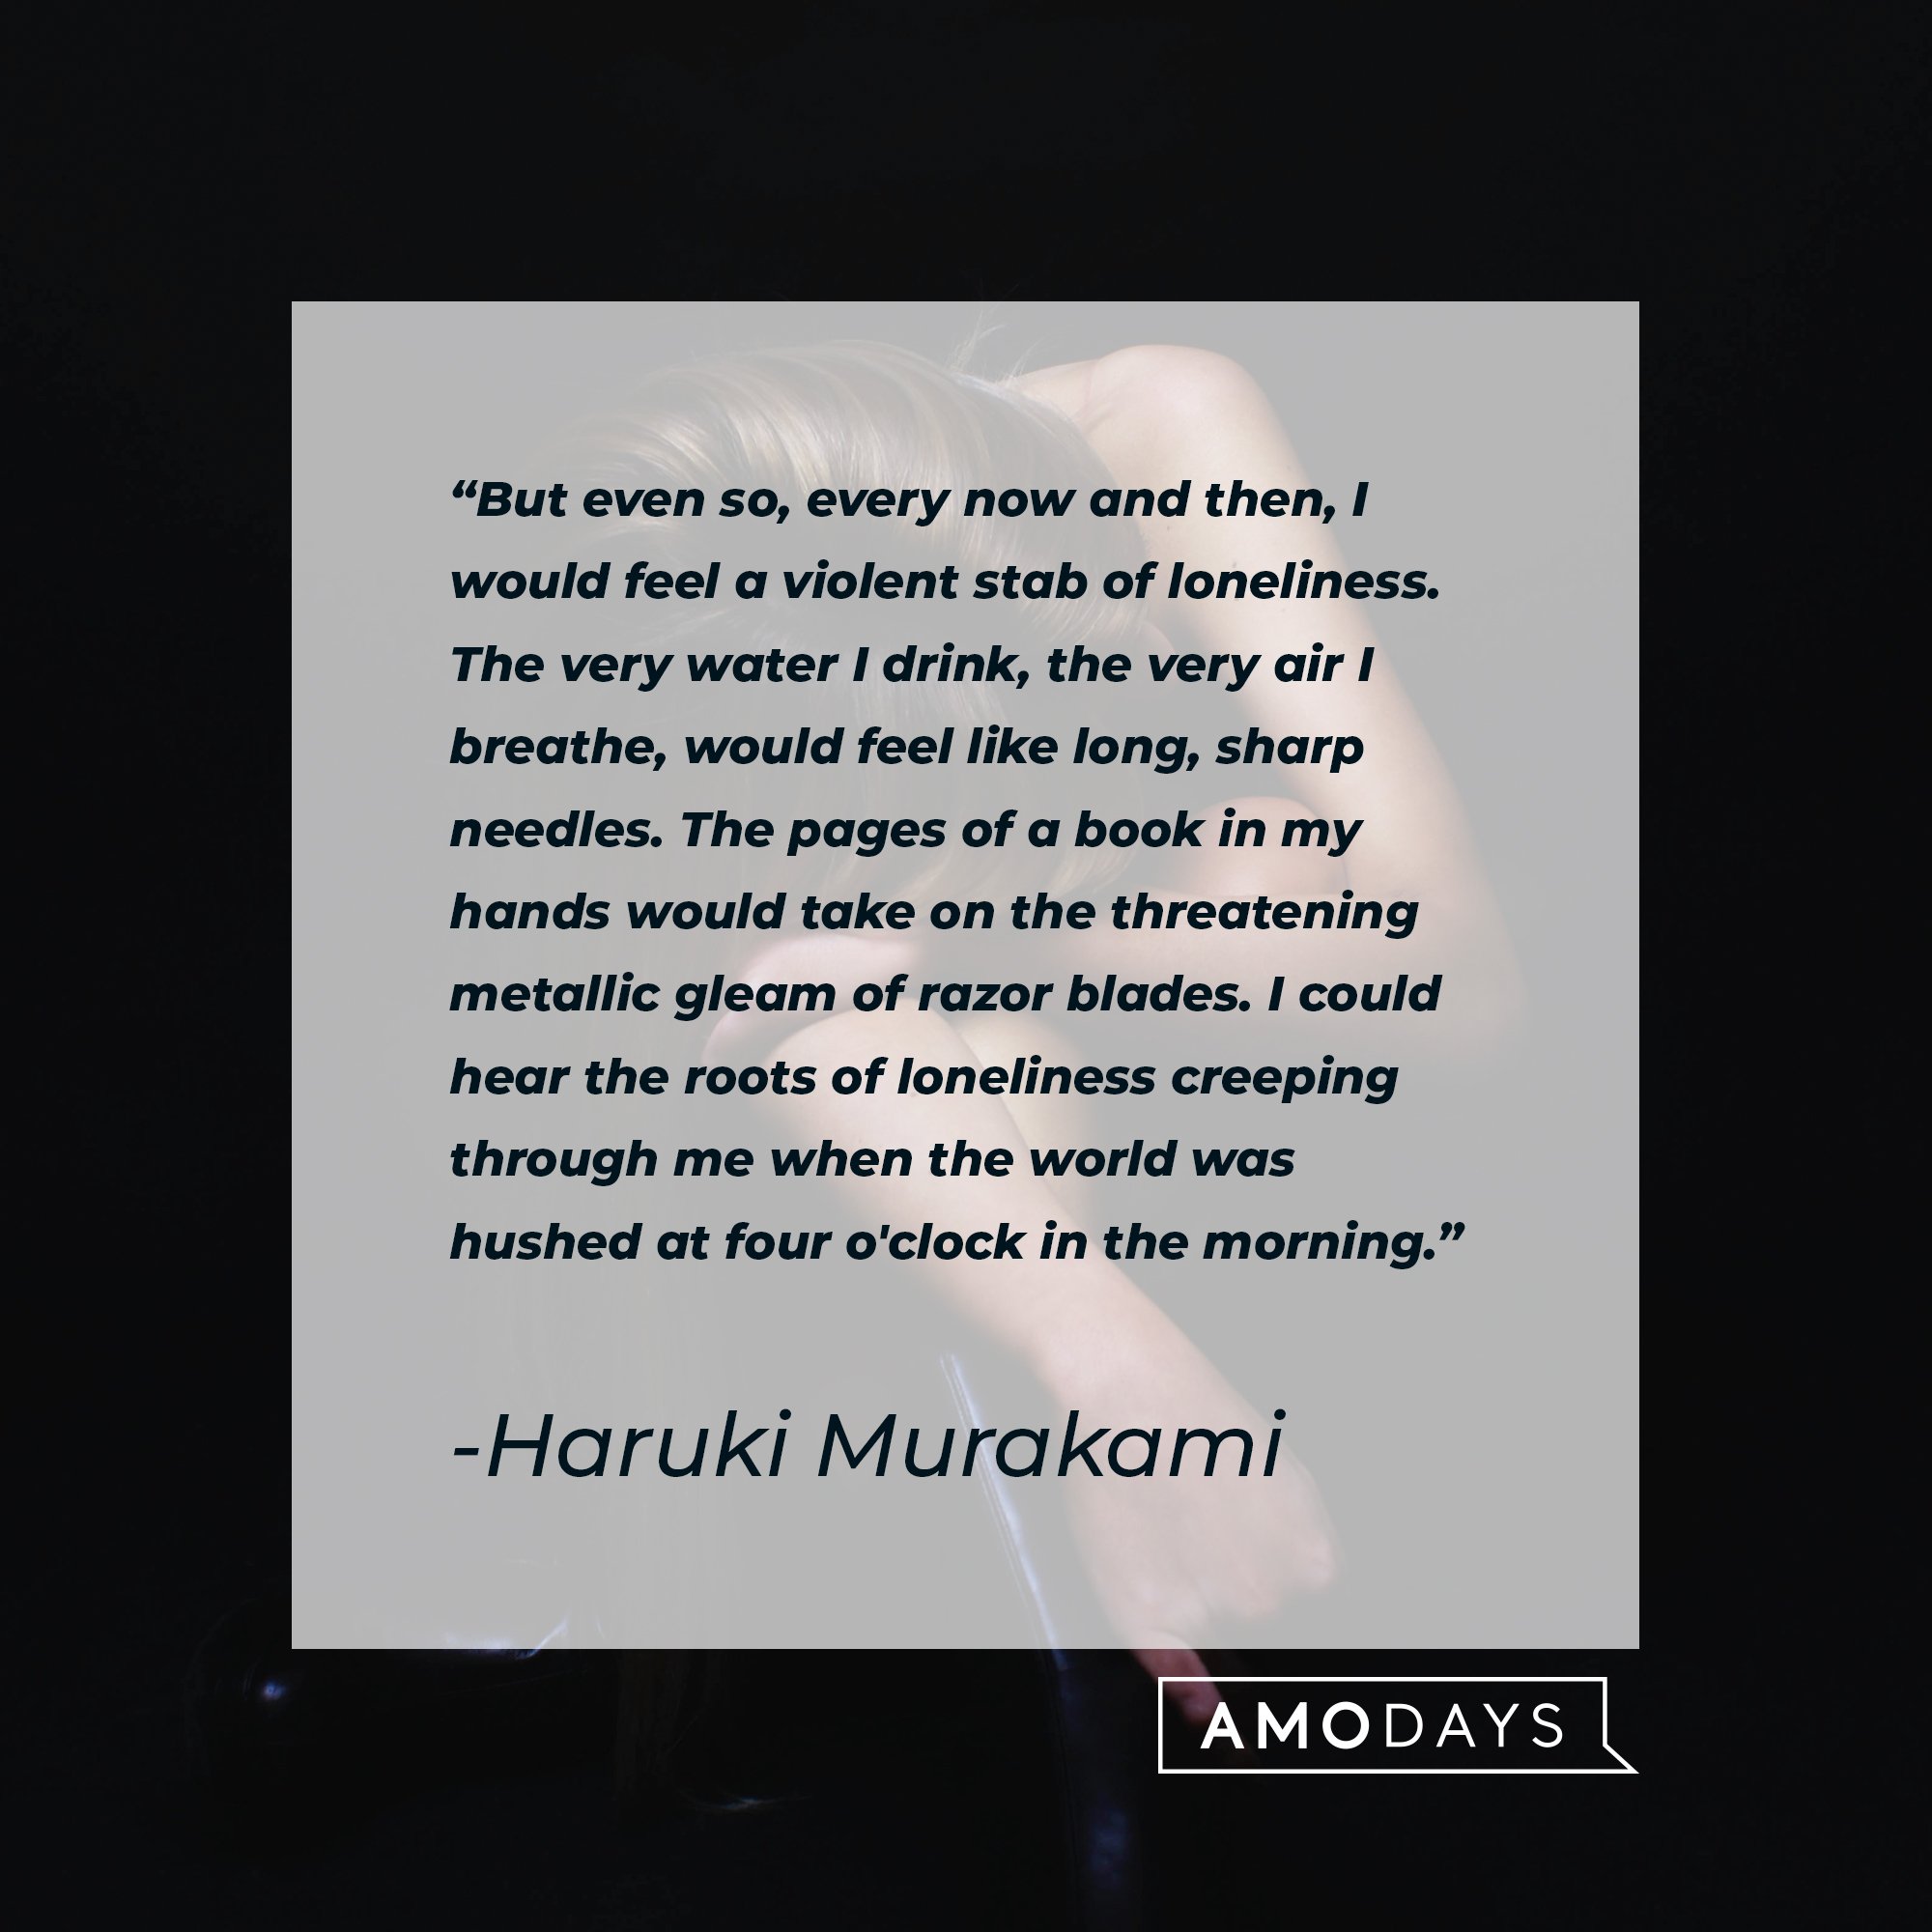 Haruki Murakami's quote: "But even so, every now and then, I would feel a violent stab of loneliness. The very water I drink, the very air I breathe, would feel like long, sharp needles. The pages of a book in my hands would take on the threatening metallic gleam of razor blades. I could hear the roots of loneliness creeping through me when the world was hushed at four o'clock in the morning." | Image: AmoDays